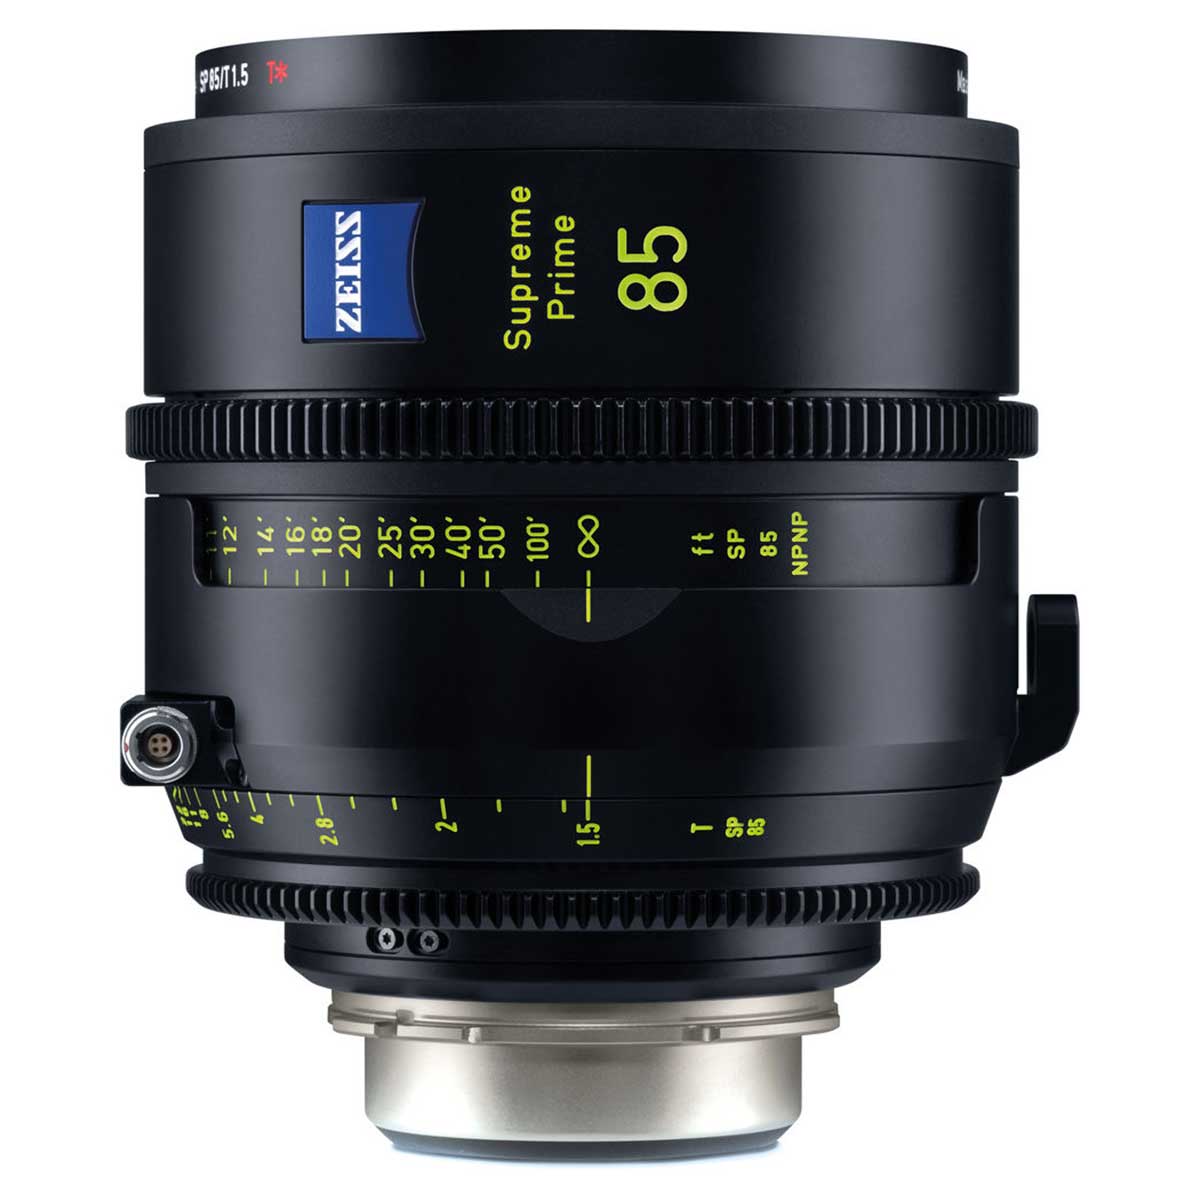 Carl Zeiss Supreme Prime 85mm T1.5